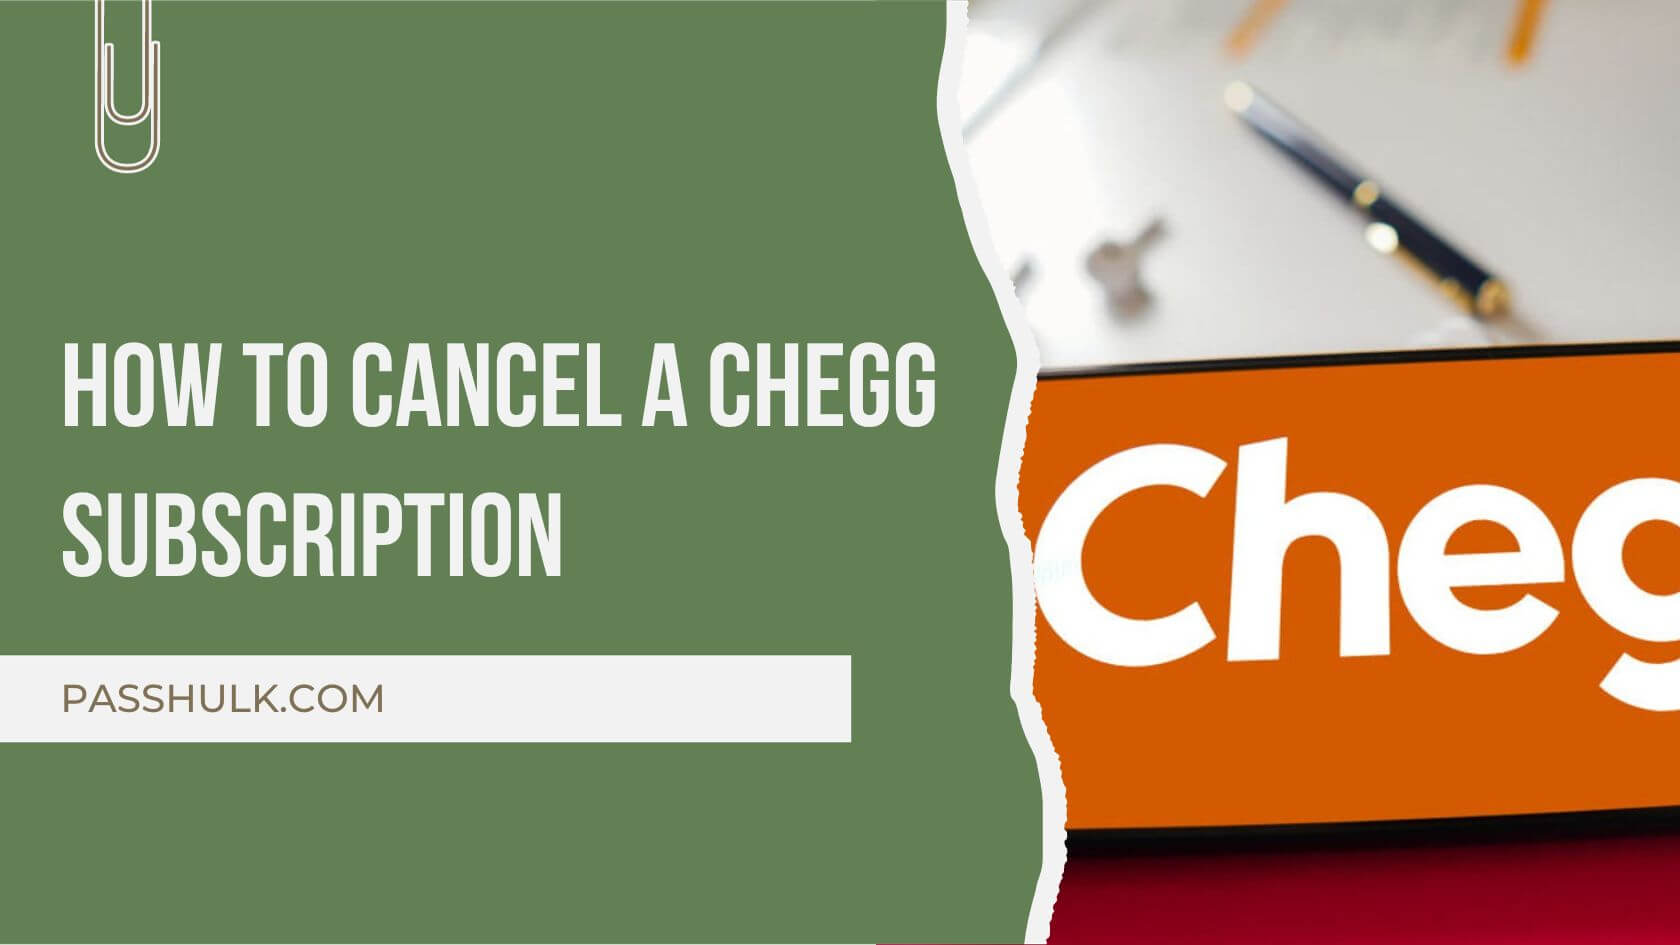 How To Cancel A Chegg Subscription